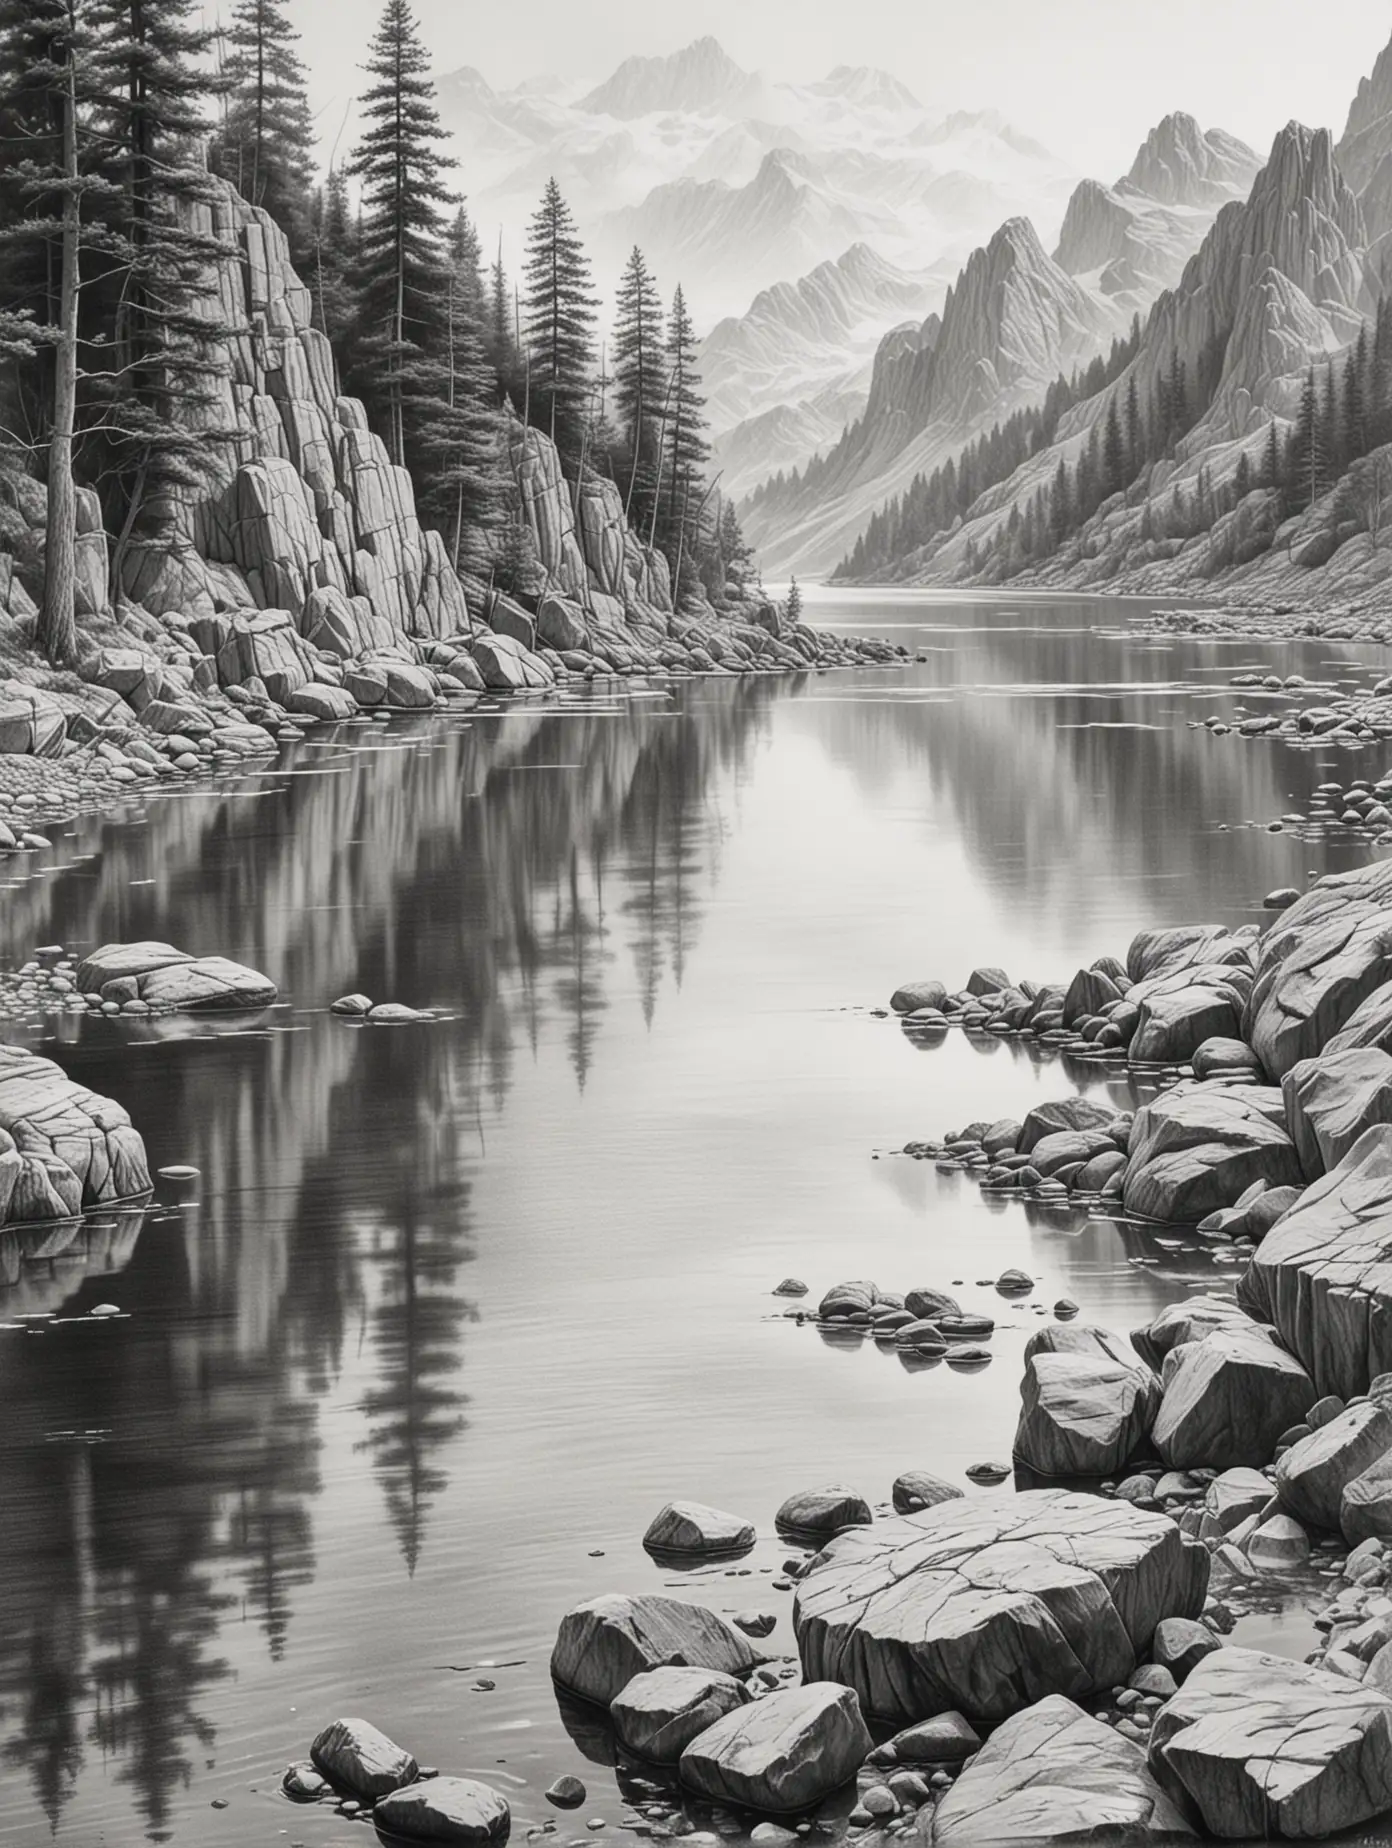 Realistic-Pencil-Sketch-of-a-Lake-with-Rocky-Shores